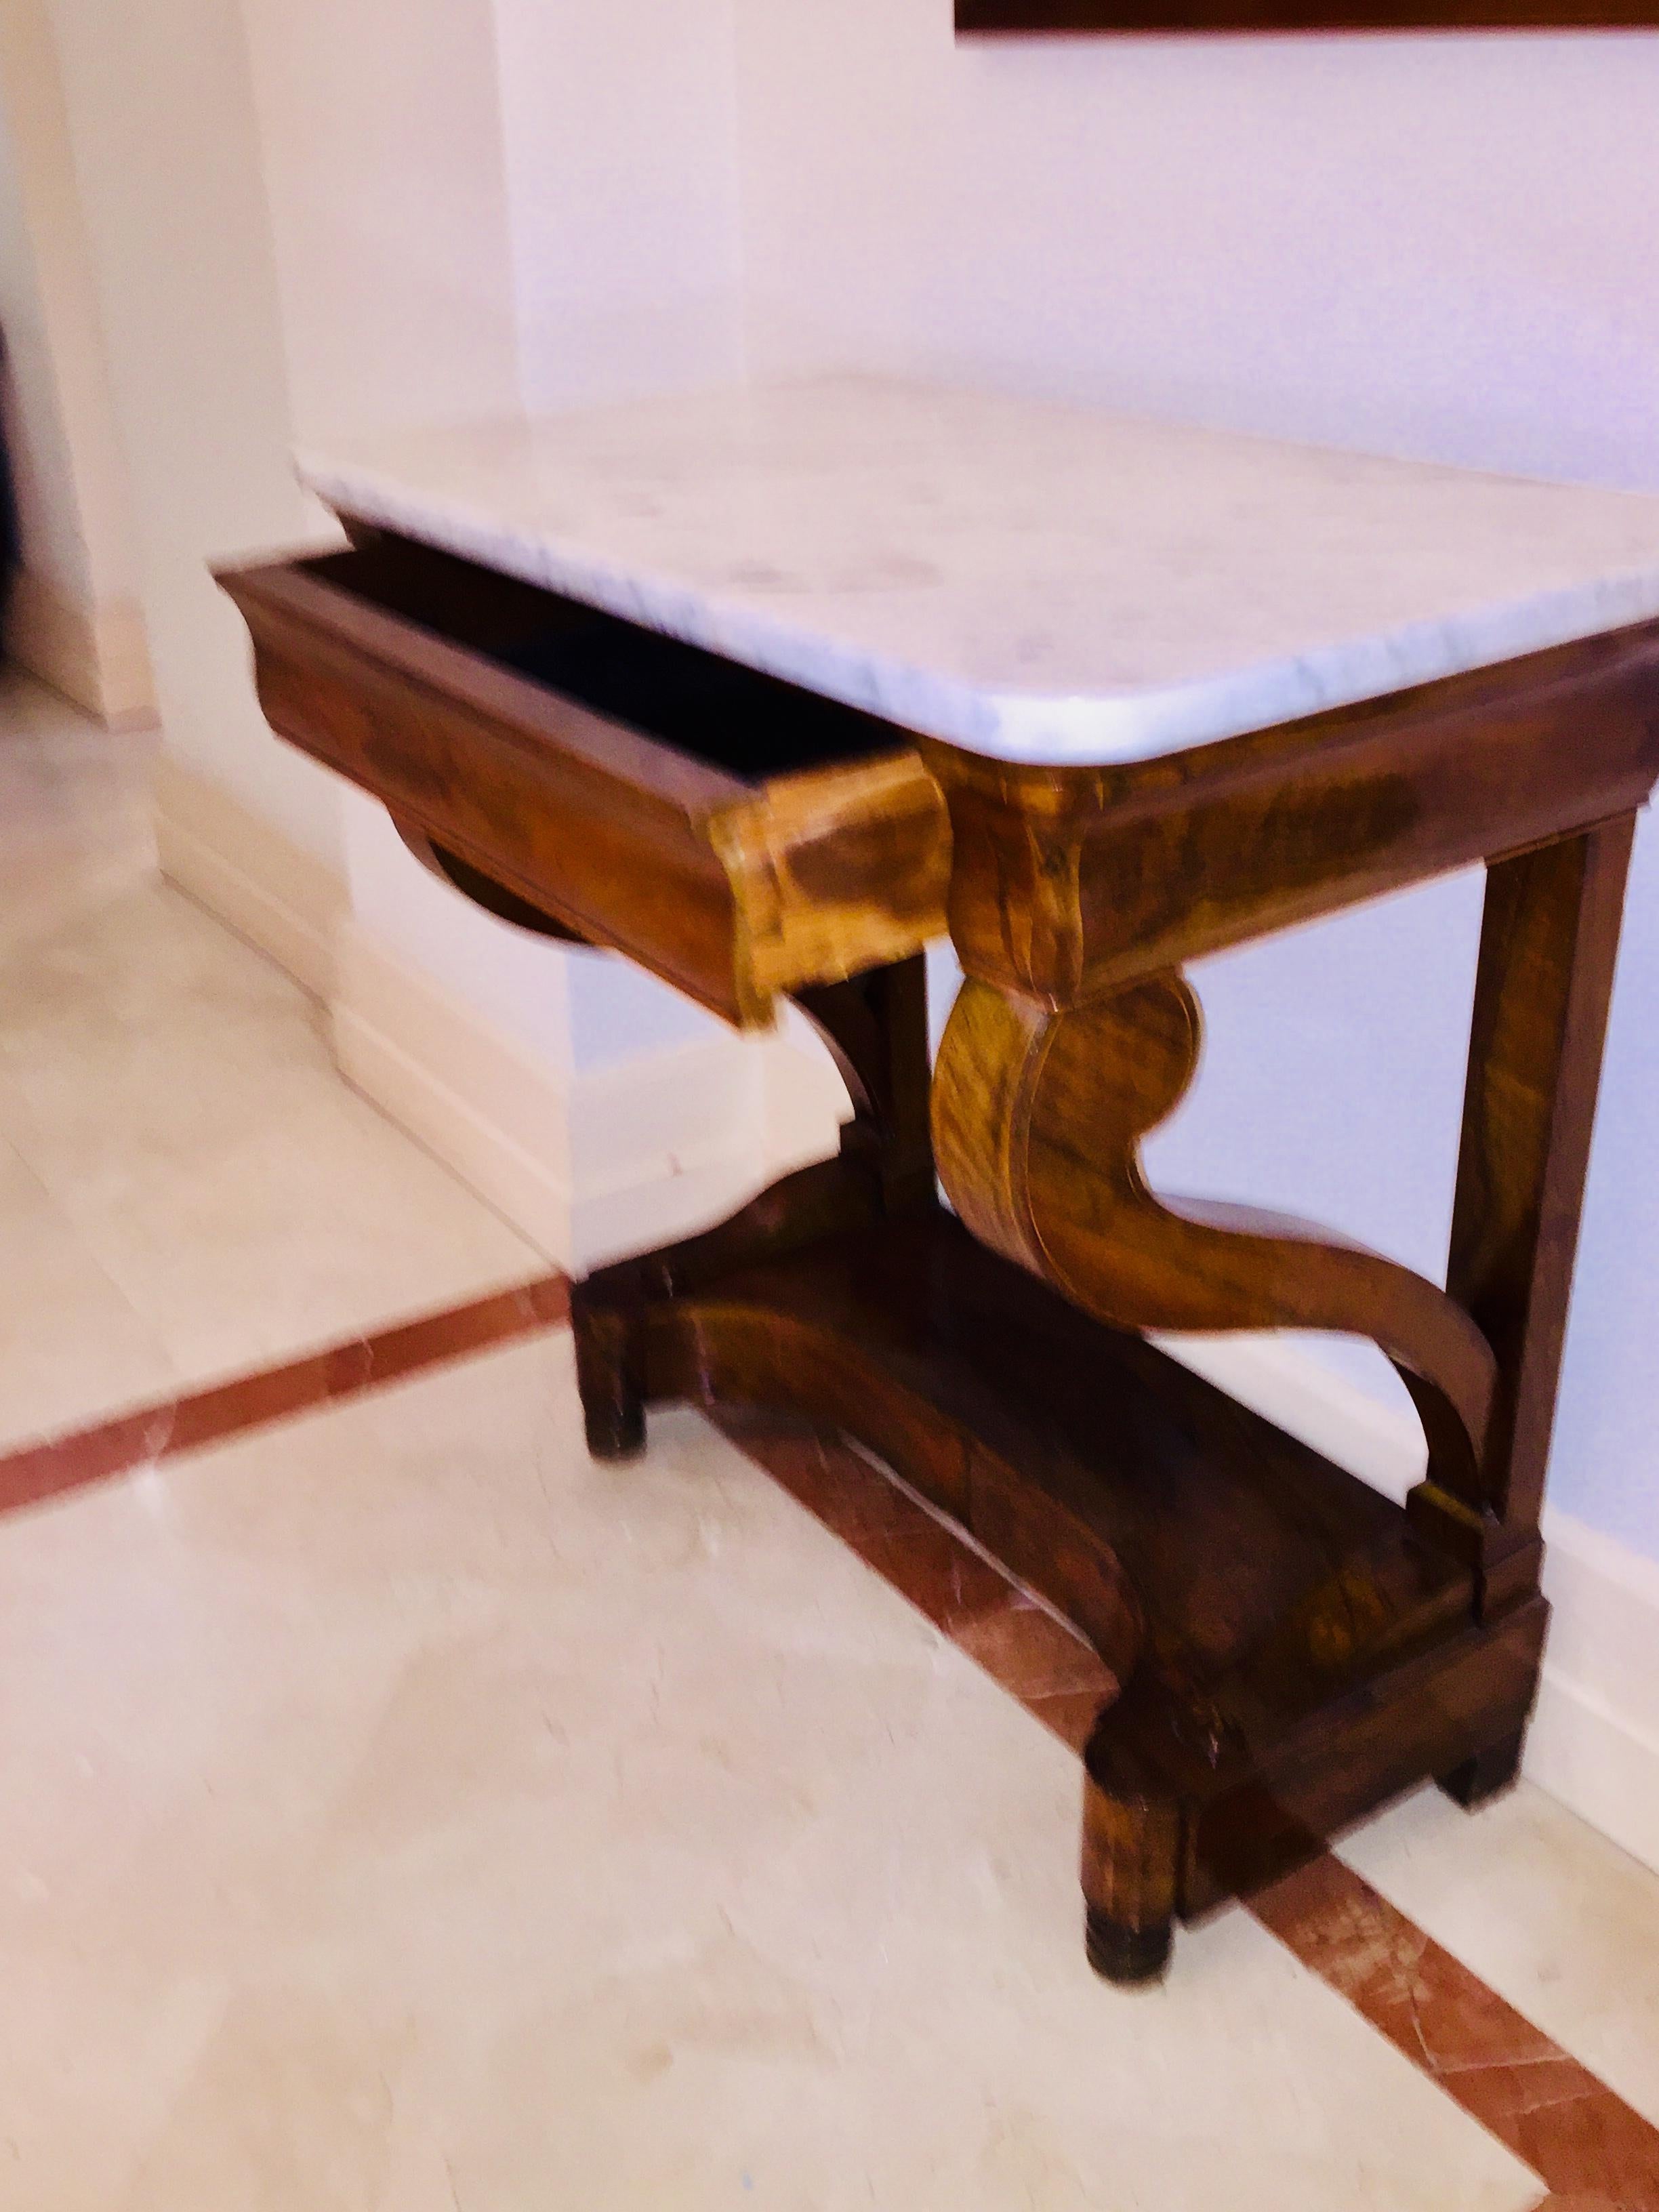 Mahogany Directoire Restauration French marble-top console table.
The size makes this piece easy to use in any place.
Details, carved Palmettes on the base, lemon tree filets inlayed are interesting and refined.
The design of the two legs is